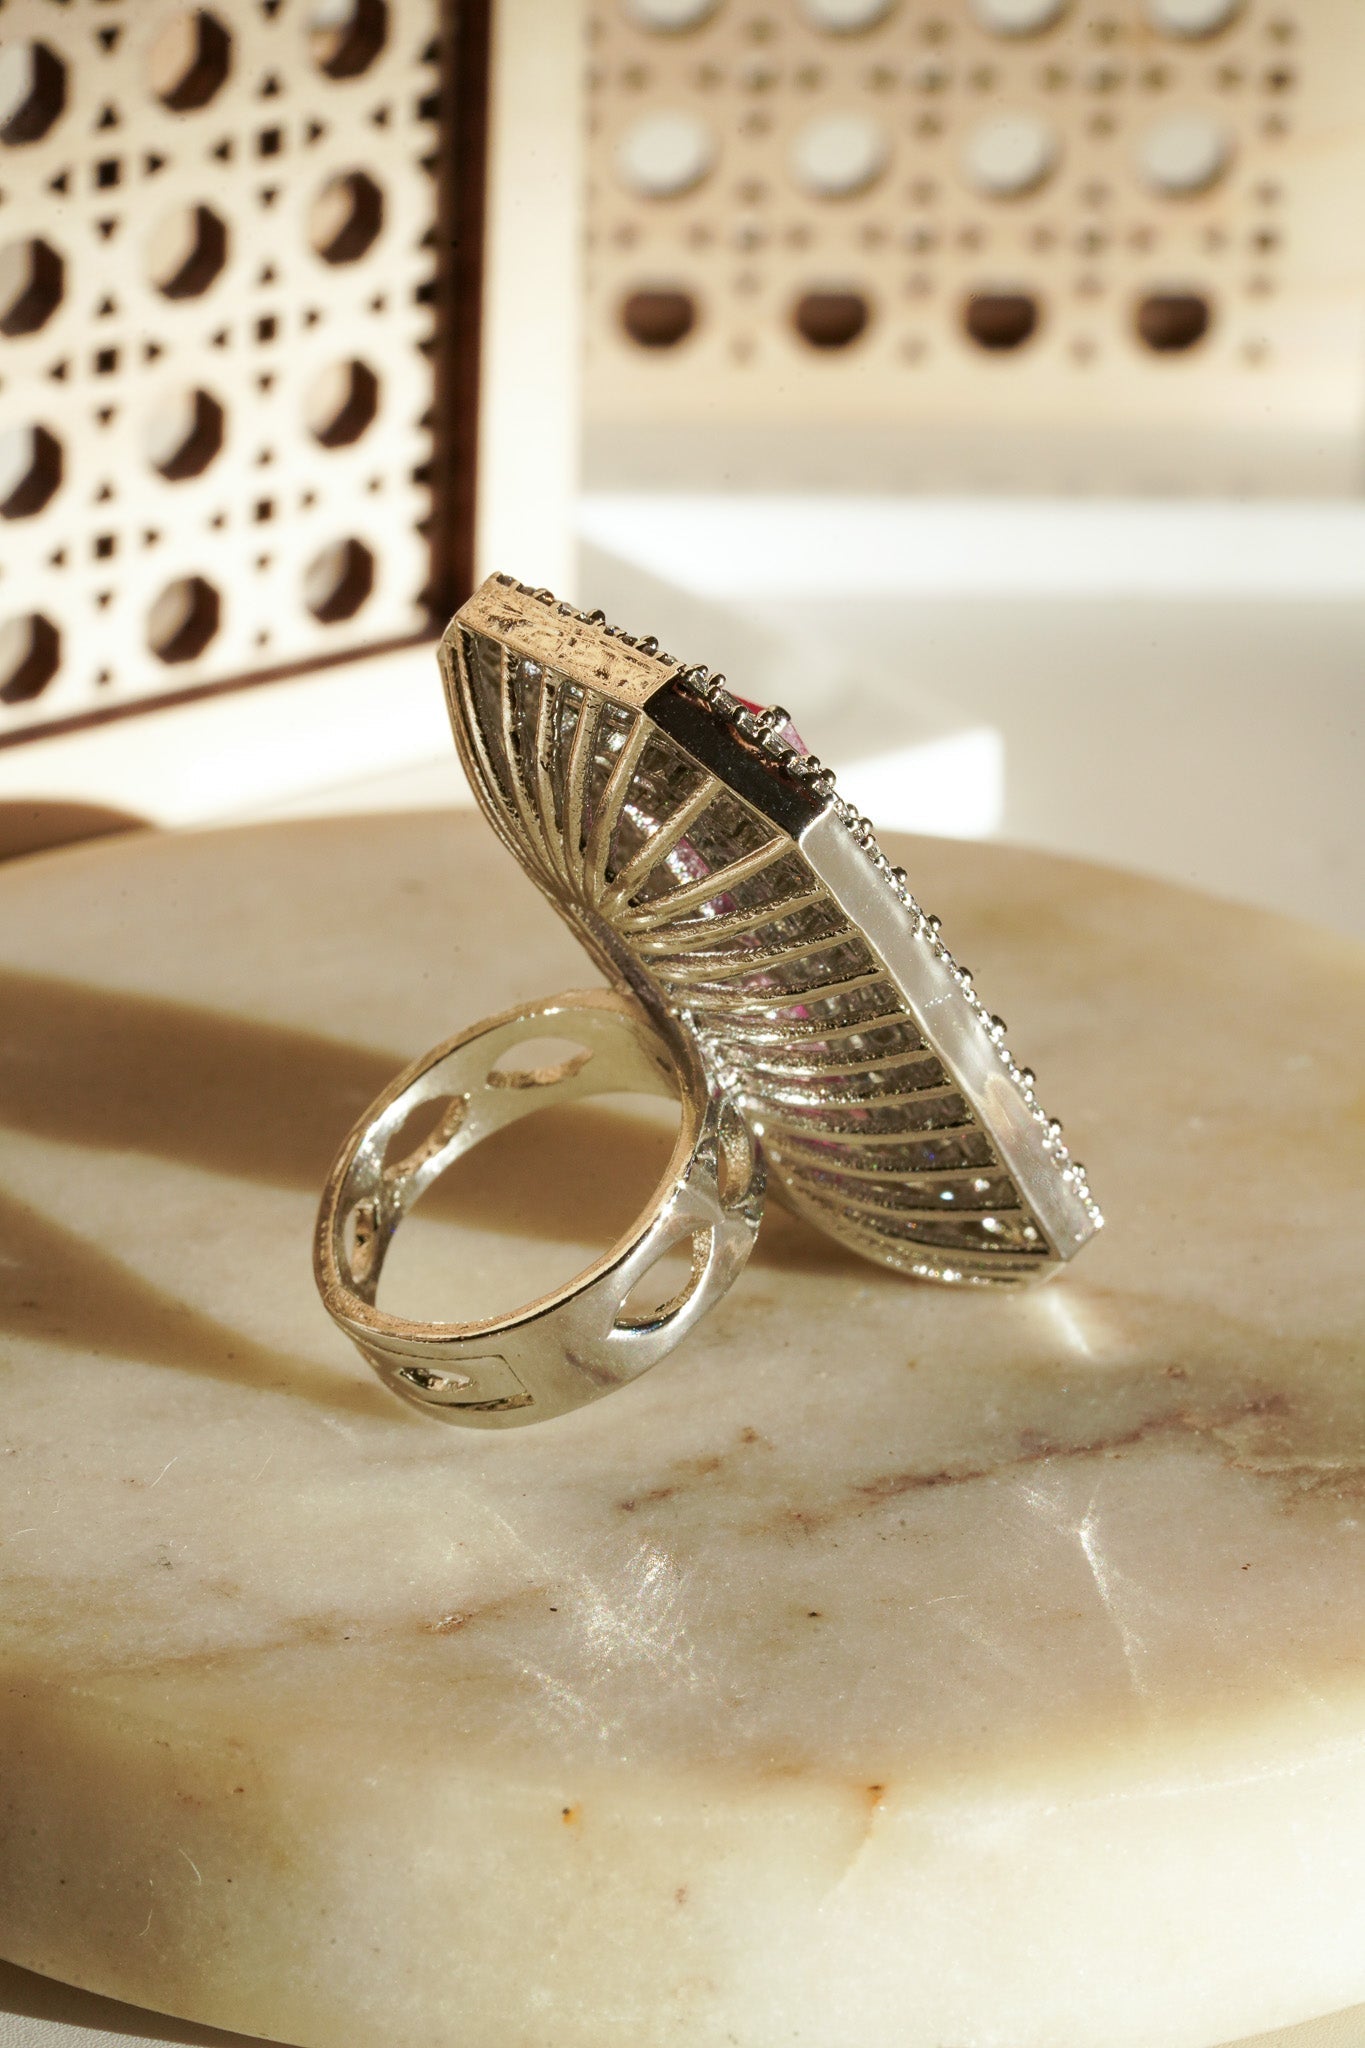 Sona - Elongated Cushion Cut AD Adjustable Ring Rings from Inaury